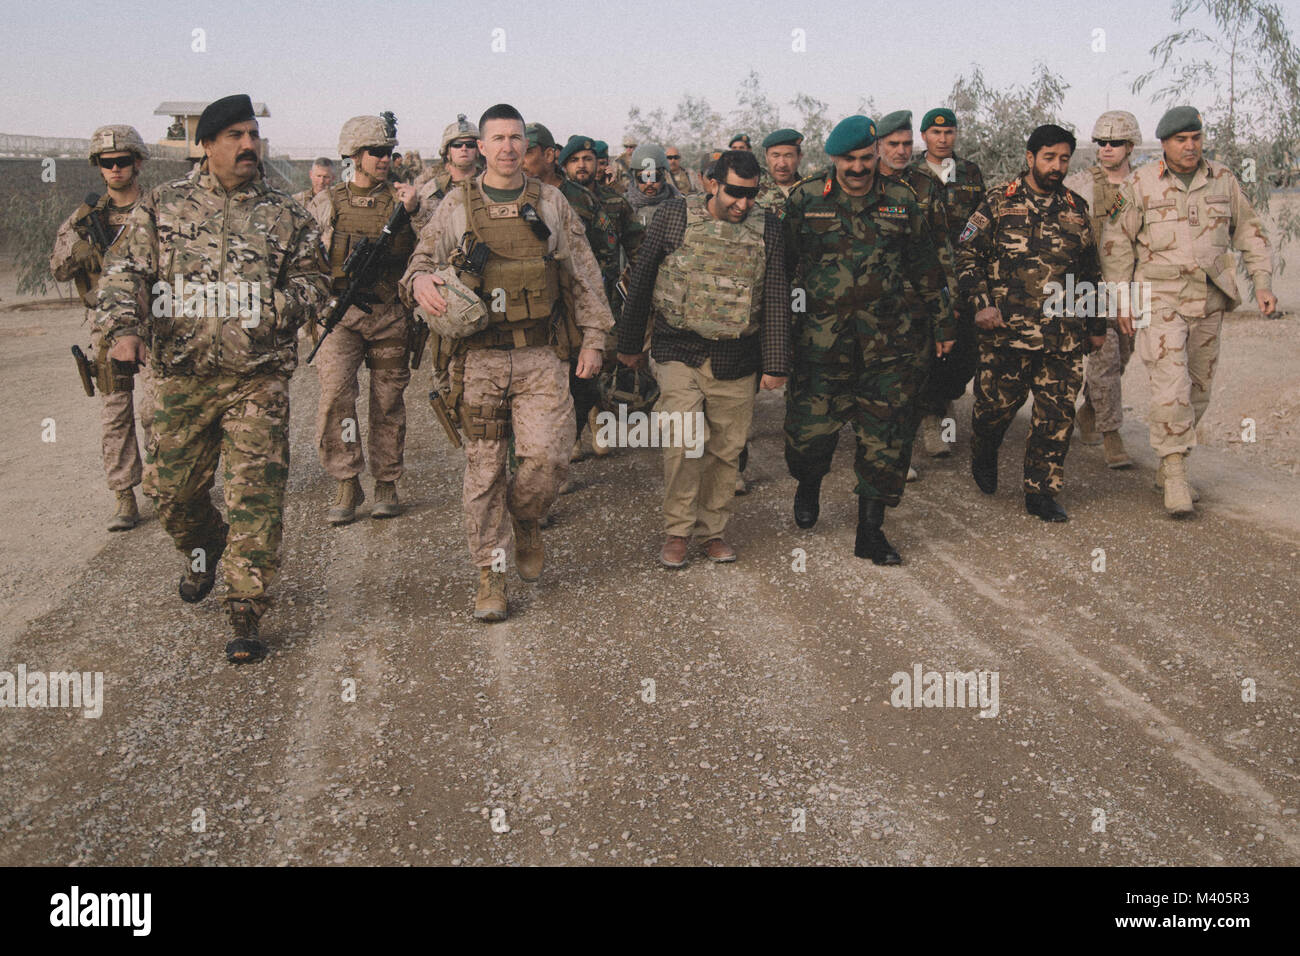 U.S. Marine Brig. Gen. Benjamin T. Watson, commanding general of Task Force Southwest (TFSW), walks with leaders of the Afghan National Defense and Security Force (ANDSF) at Camp Delaram, Afghanistan Feb. 5, 2018. Key leaders from TFSW and the ANDSF conducted a security shura to gain a greater understanding of the security situation through local elders from Nimroz province.   (U.S. Marine Corps photo by Sgt. Conner Robbins) Stock Photo